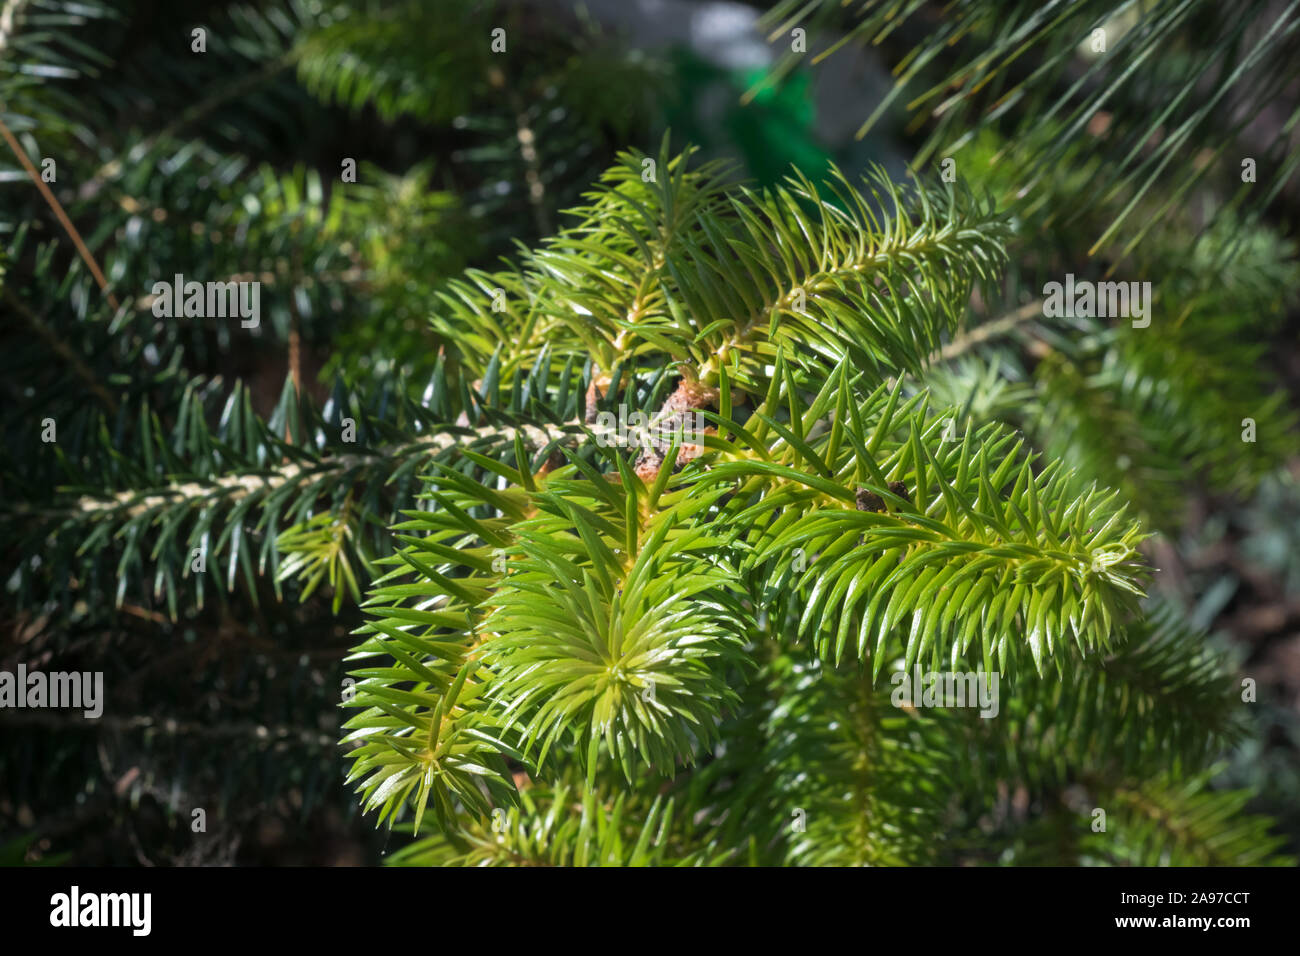 Young shoots of Spanish fir (Abies pinsapo) Stock Photo